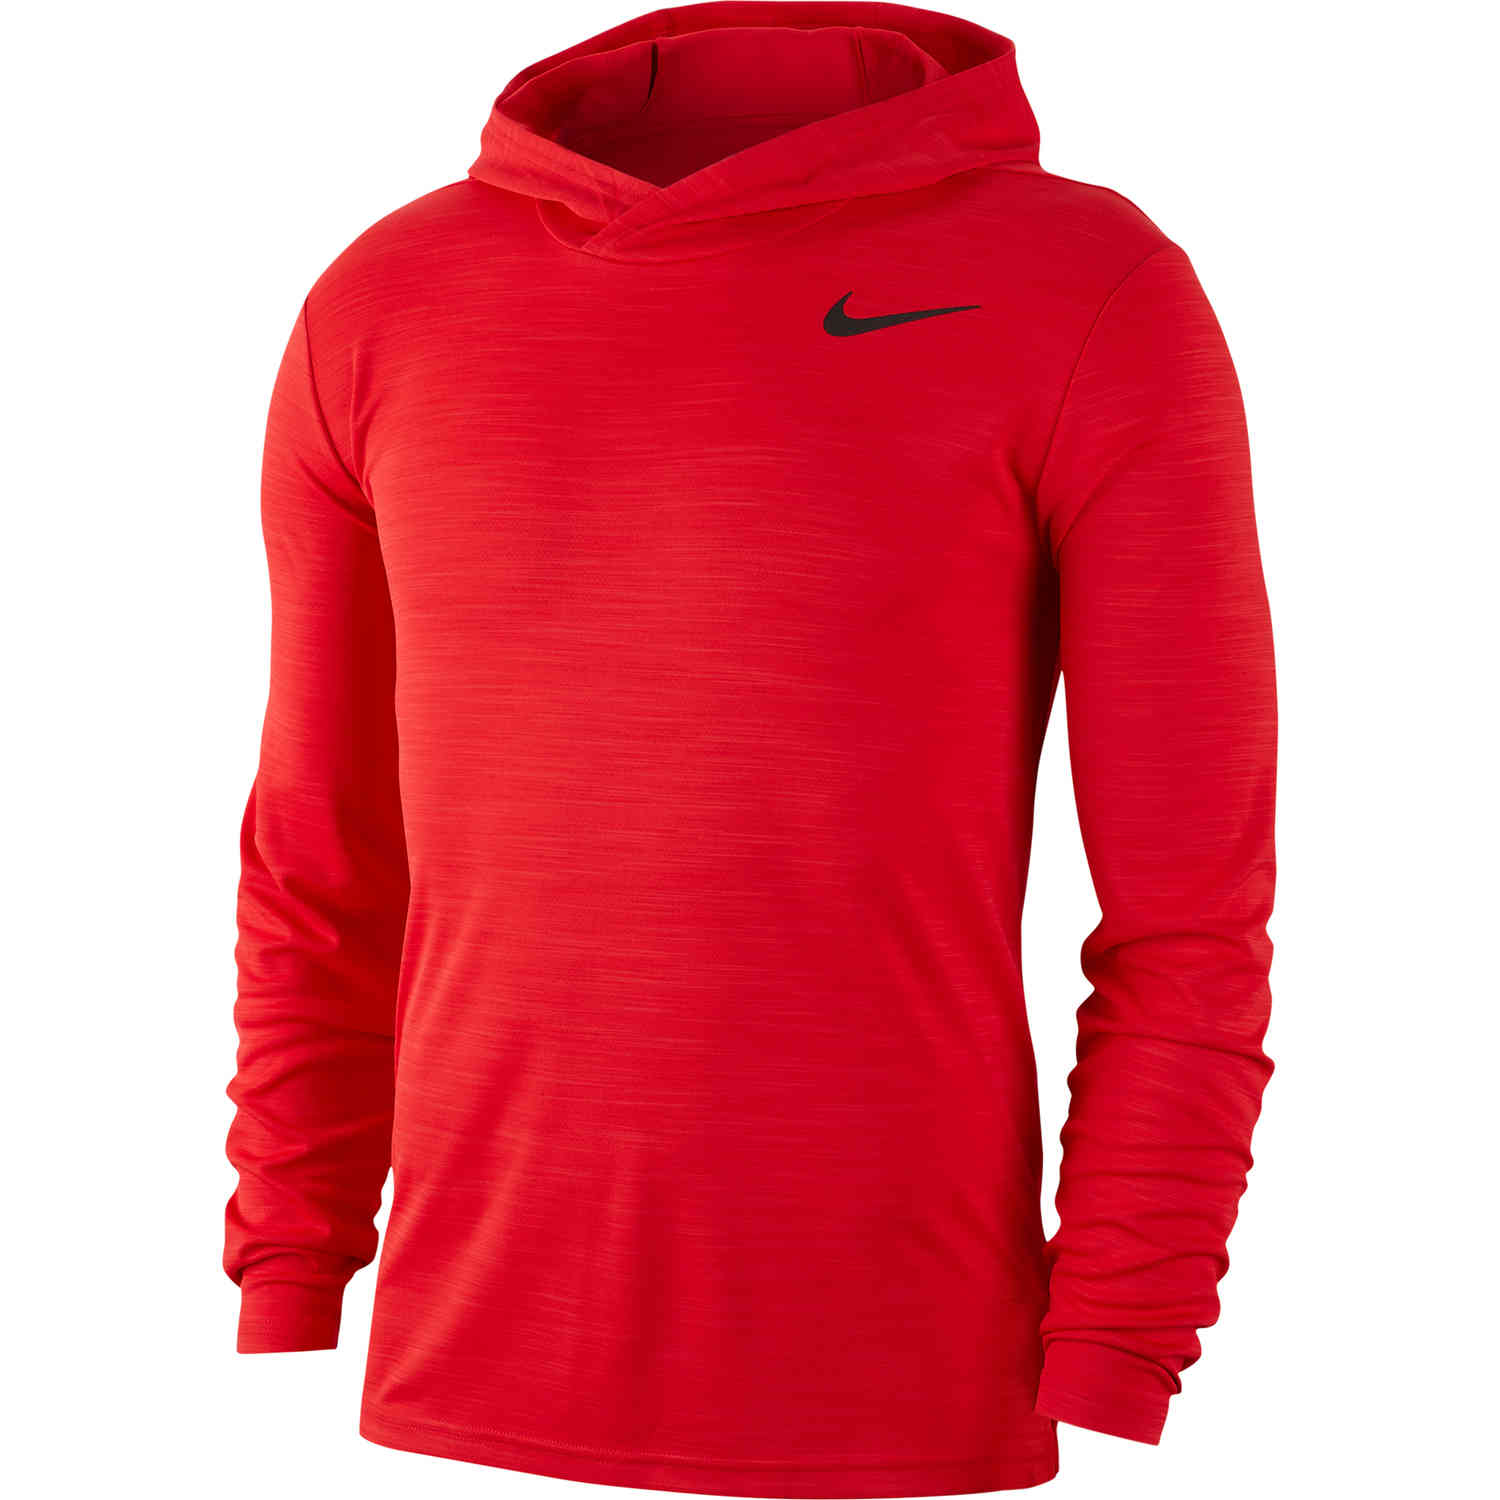 nike red training top